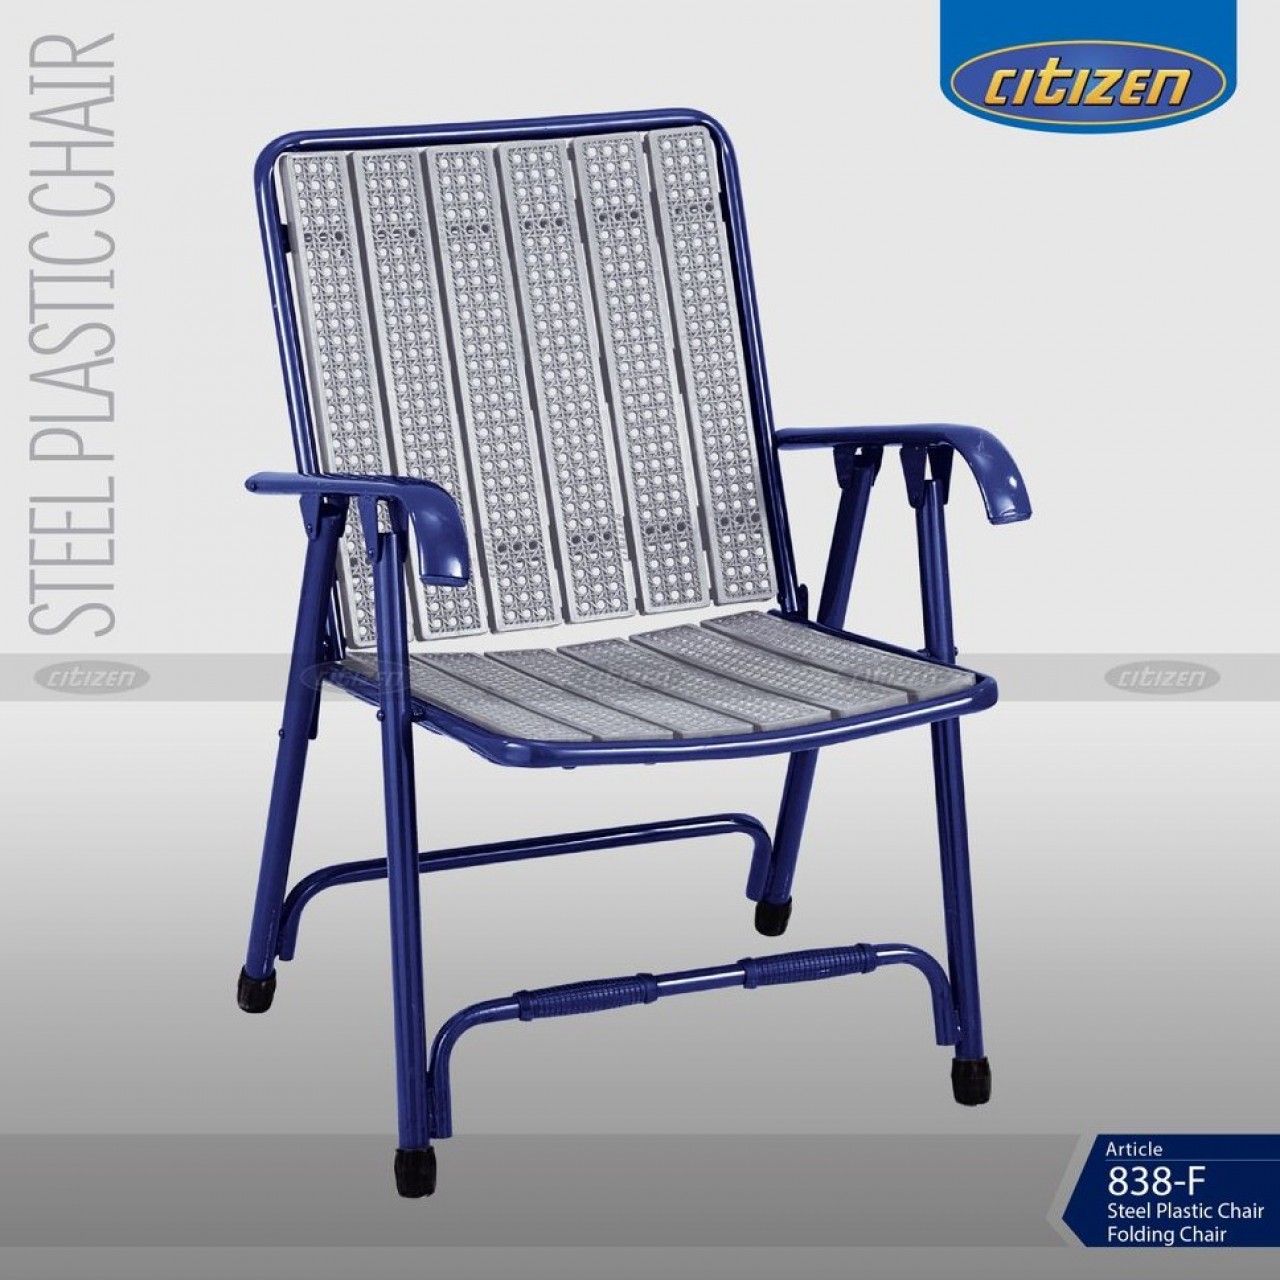 Citizen 838-F Steel & Plastic Folding Chair - With Arms